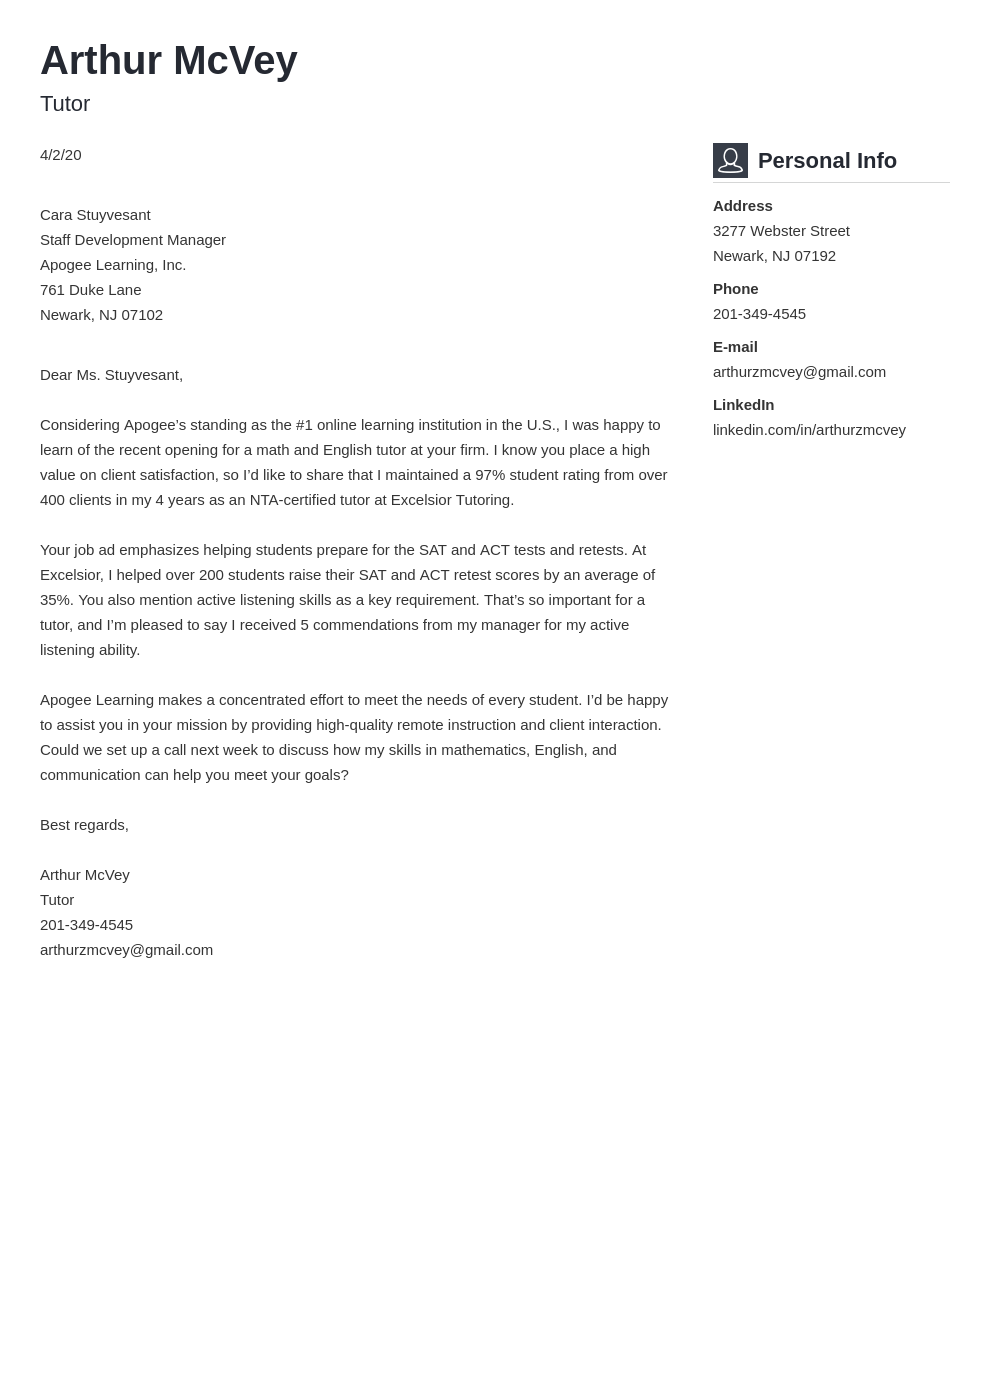 example of formal resume letter